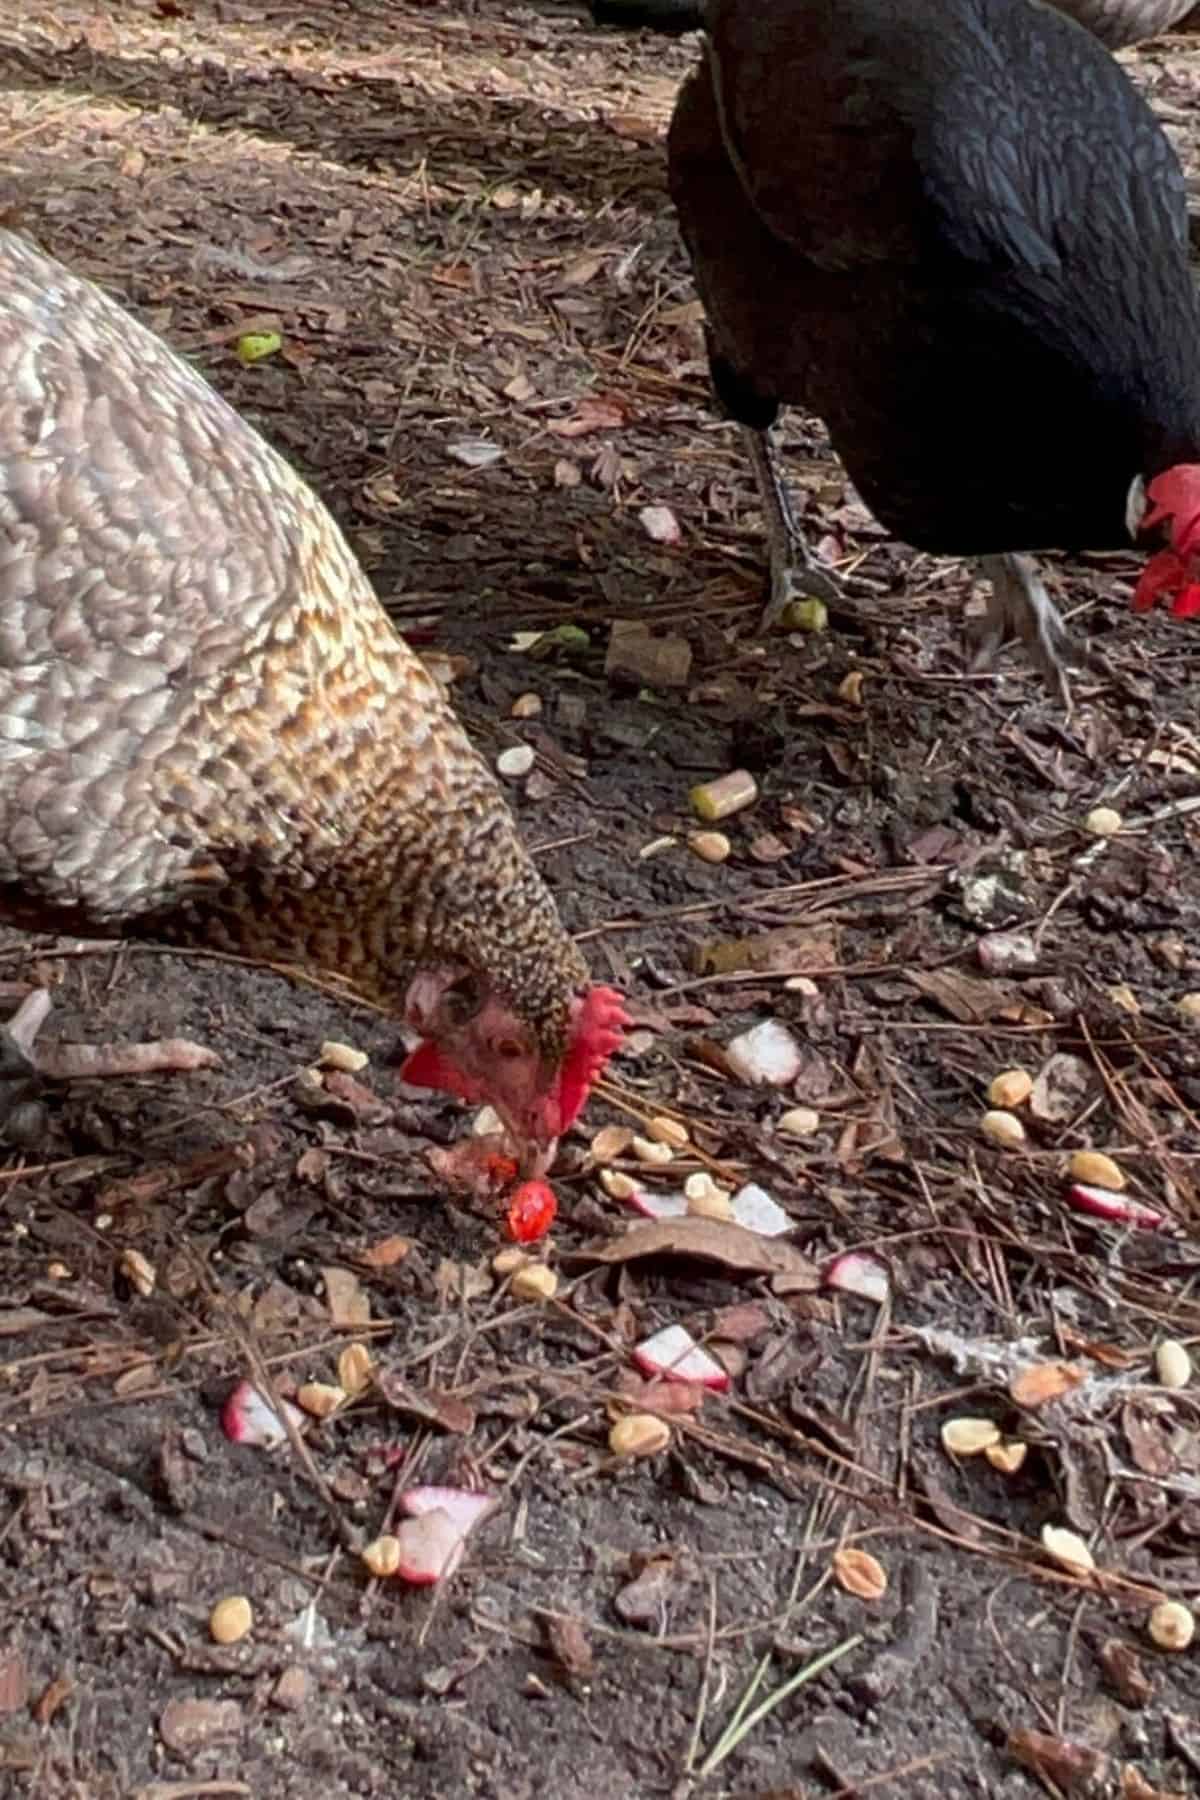 Chickens eating peanuts off the ground.